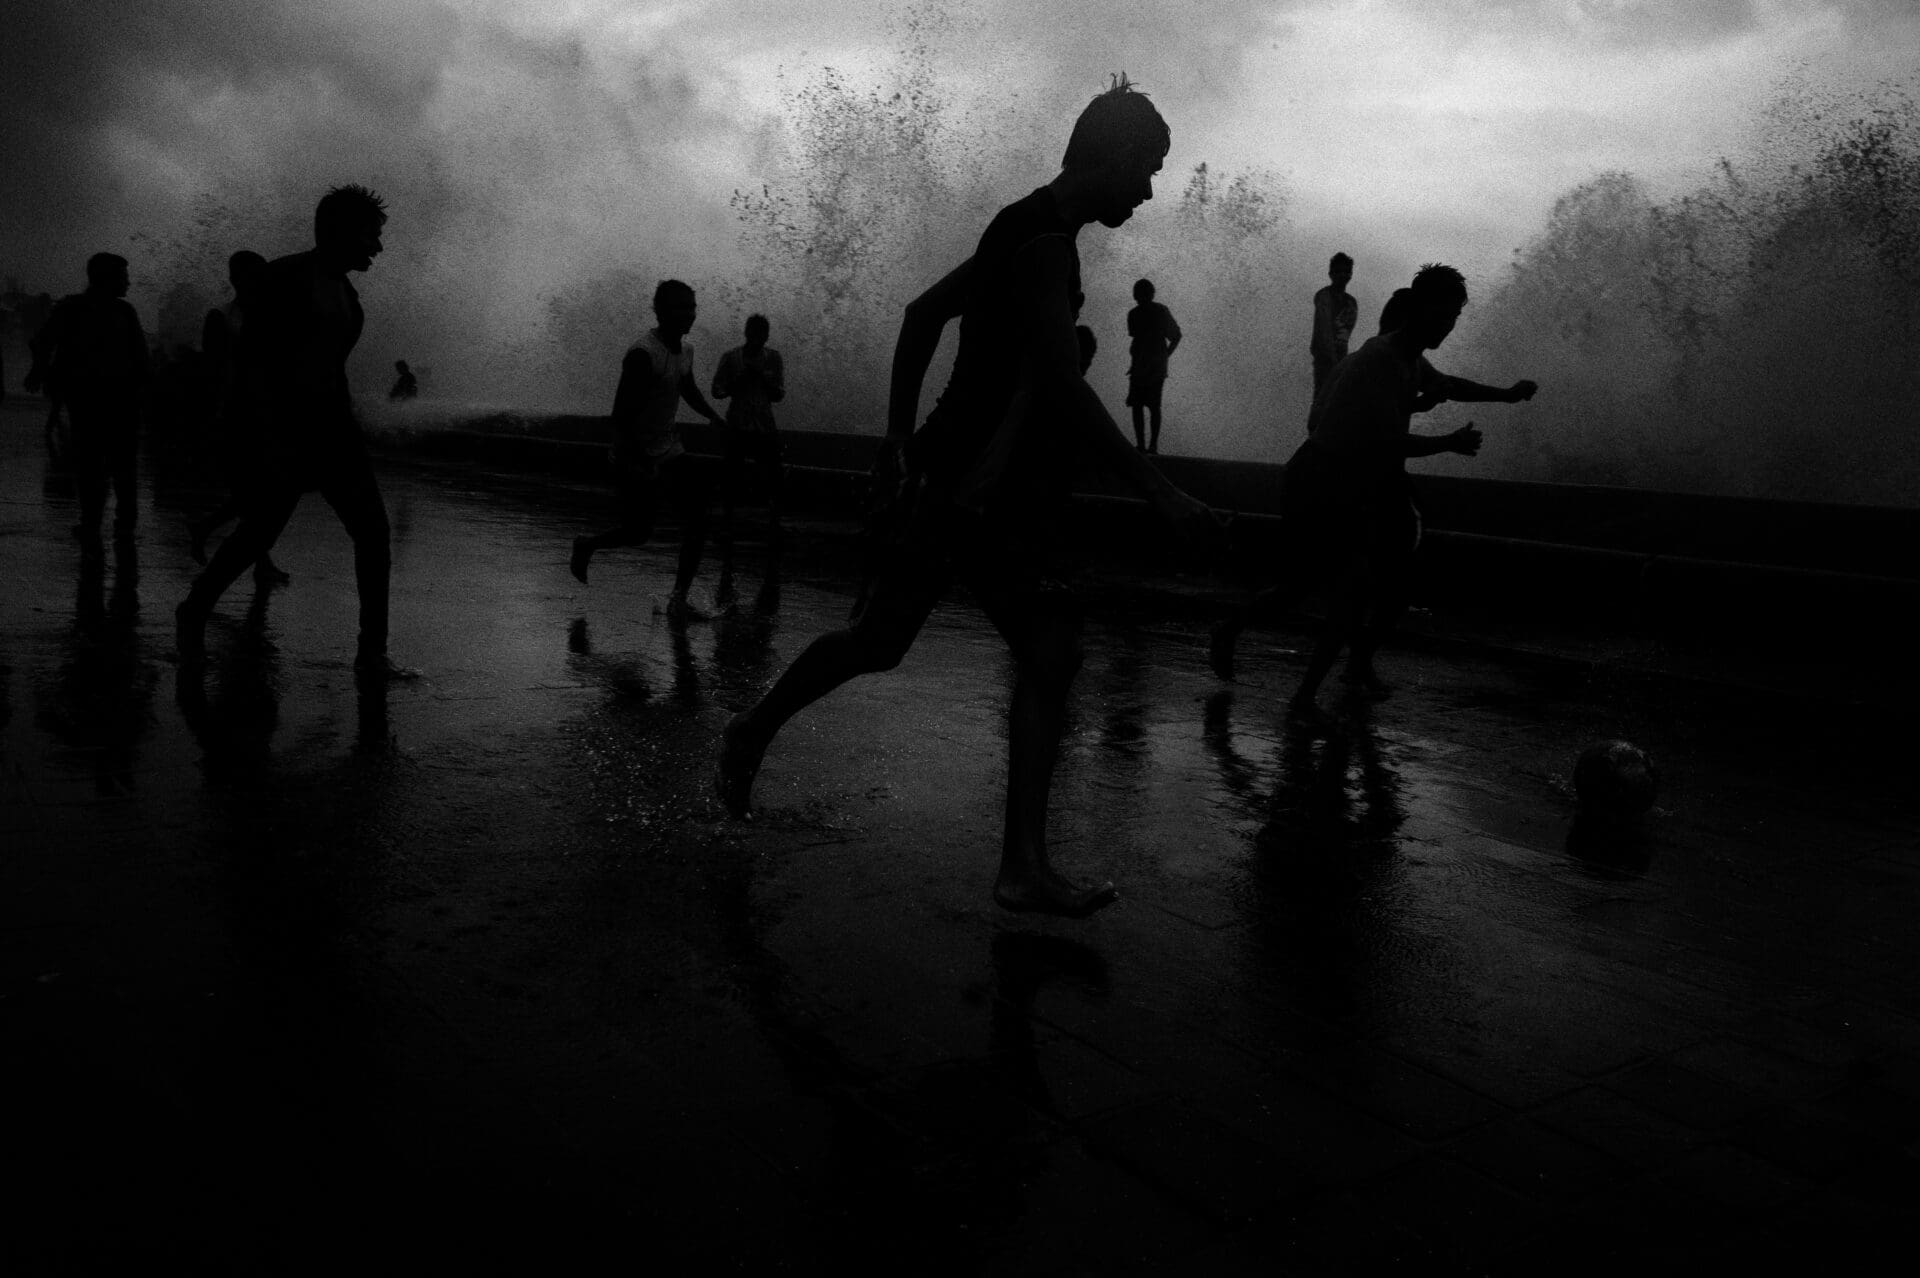 Photographer Sunhil Sippy on Mumbai | dark figures frolic in watery spray, photographed in black and white